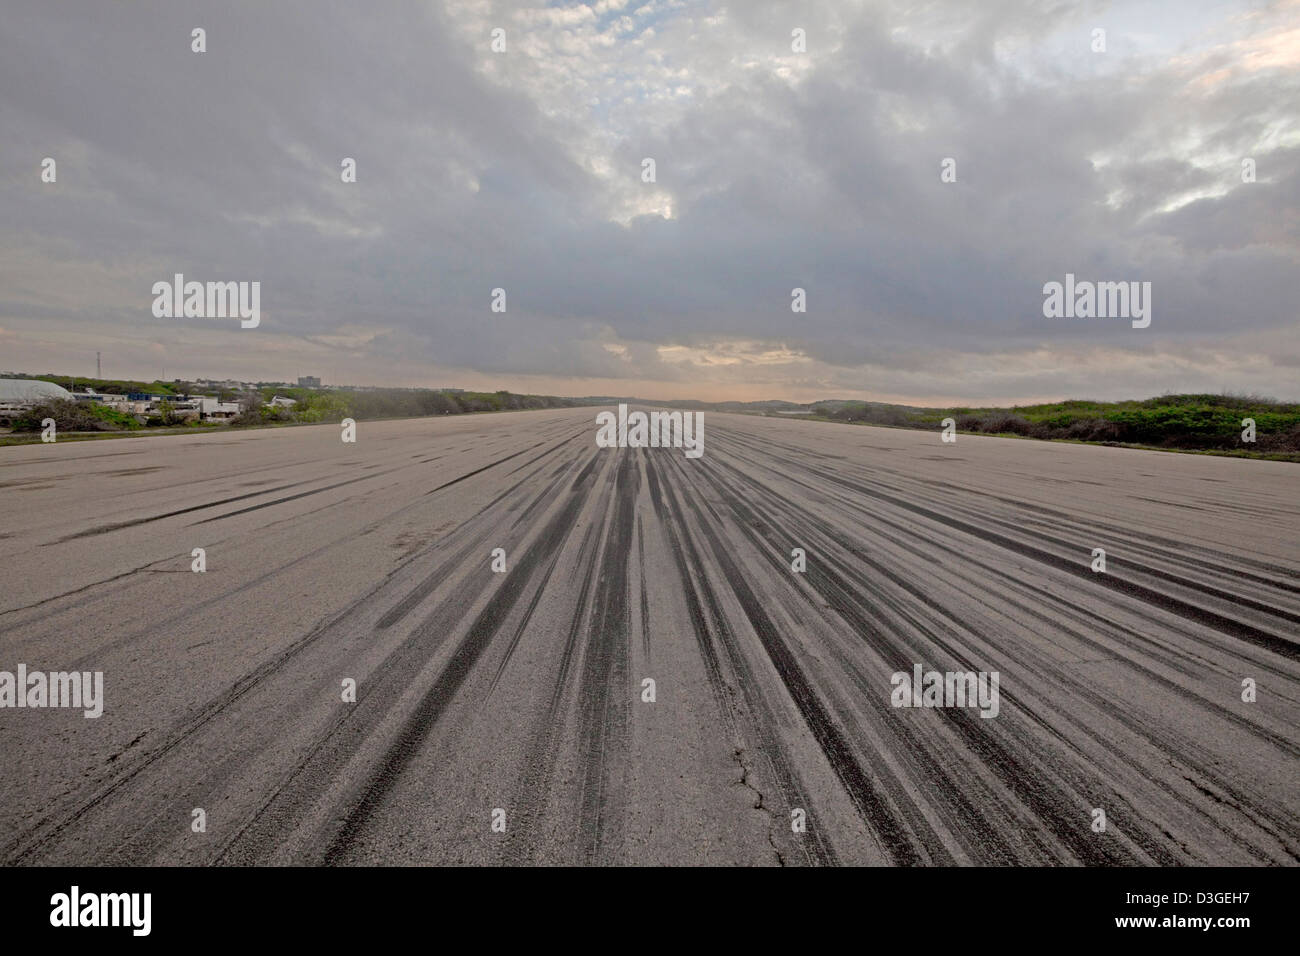 An early morning view on the runway at the Aden Ade International Airport. Stock Photo